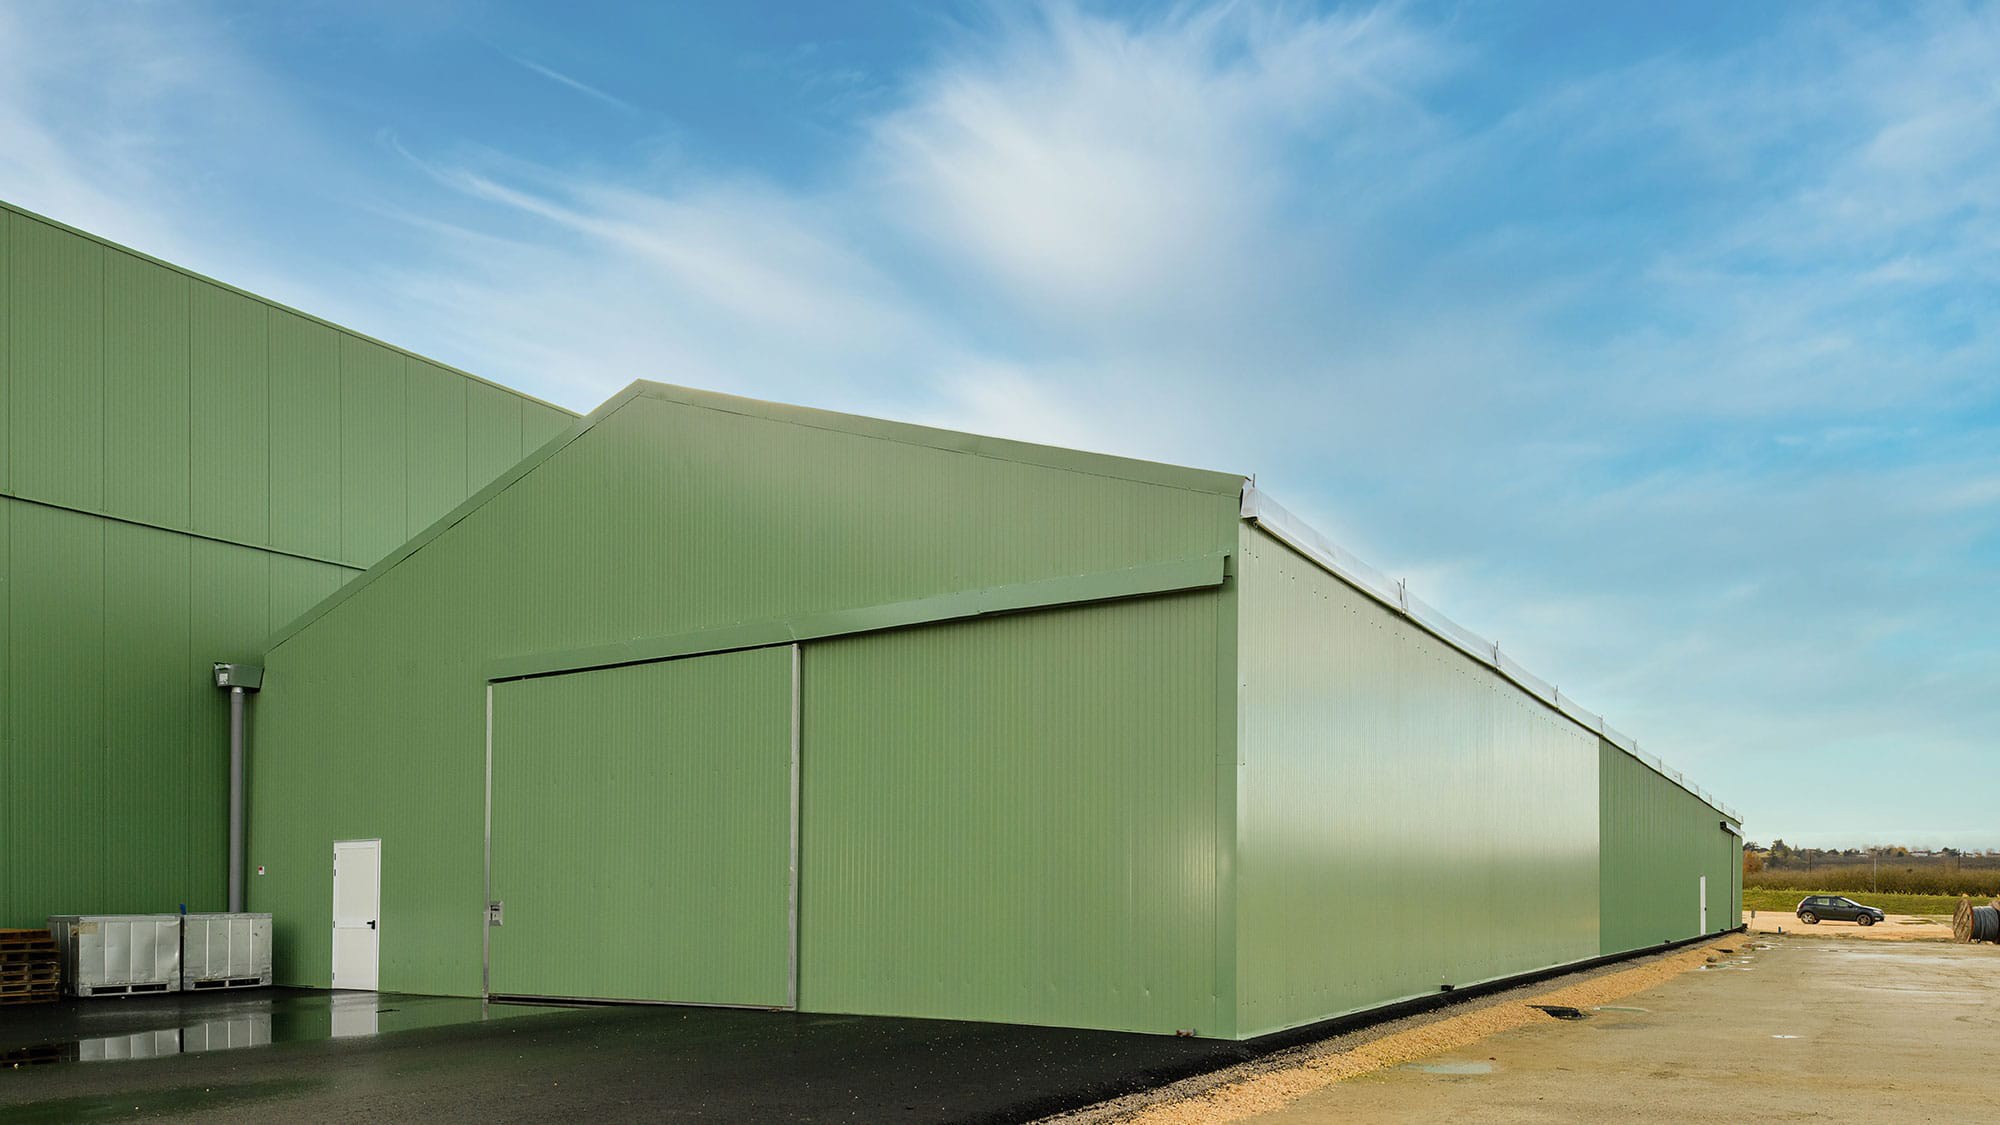 Lauralu temporary industrial buildings and modular medical building with external green warehouse